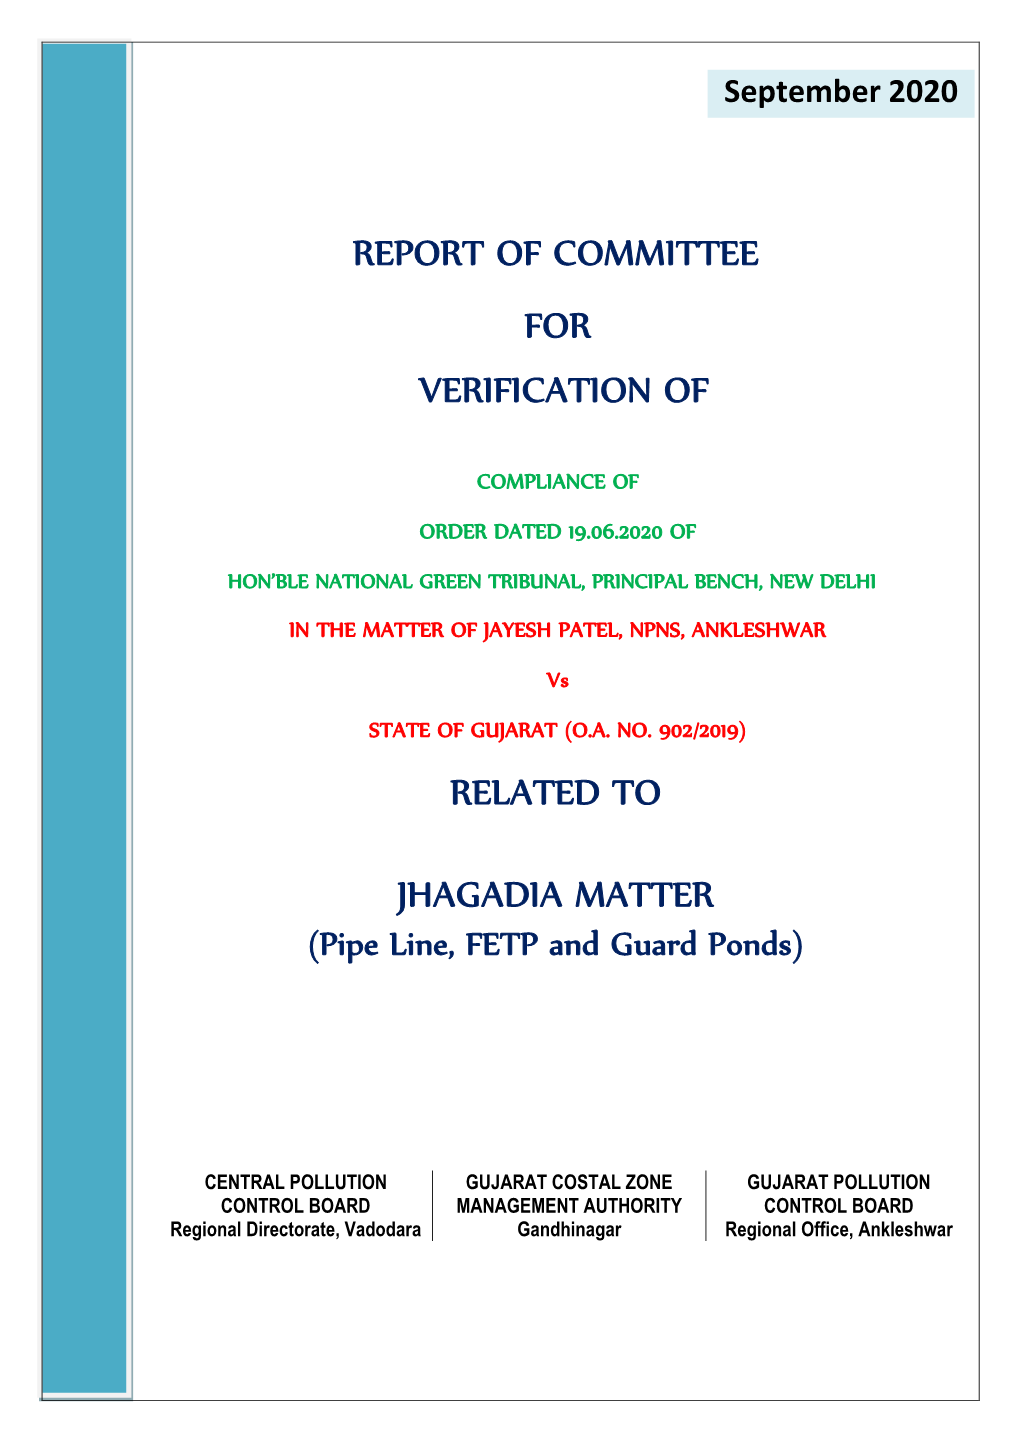 Report of Committee for Verification of Related To